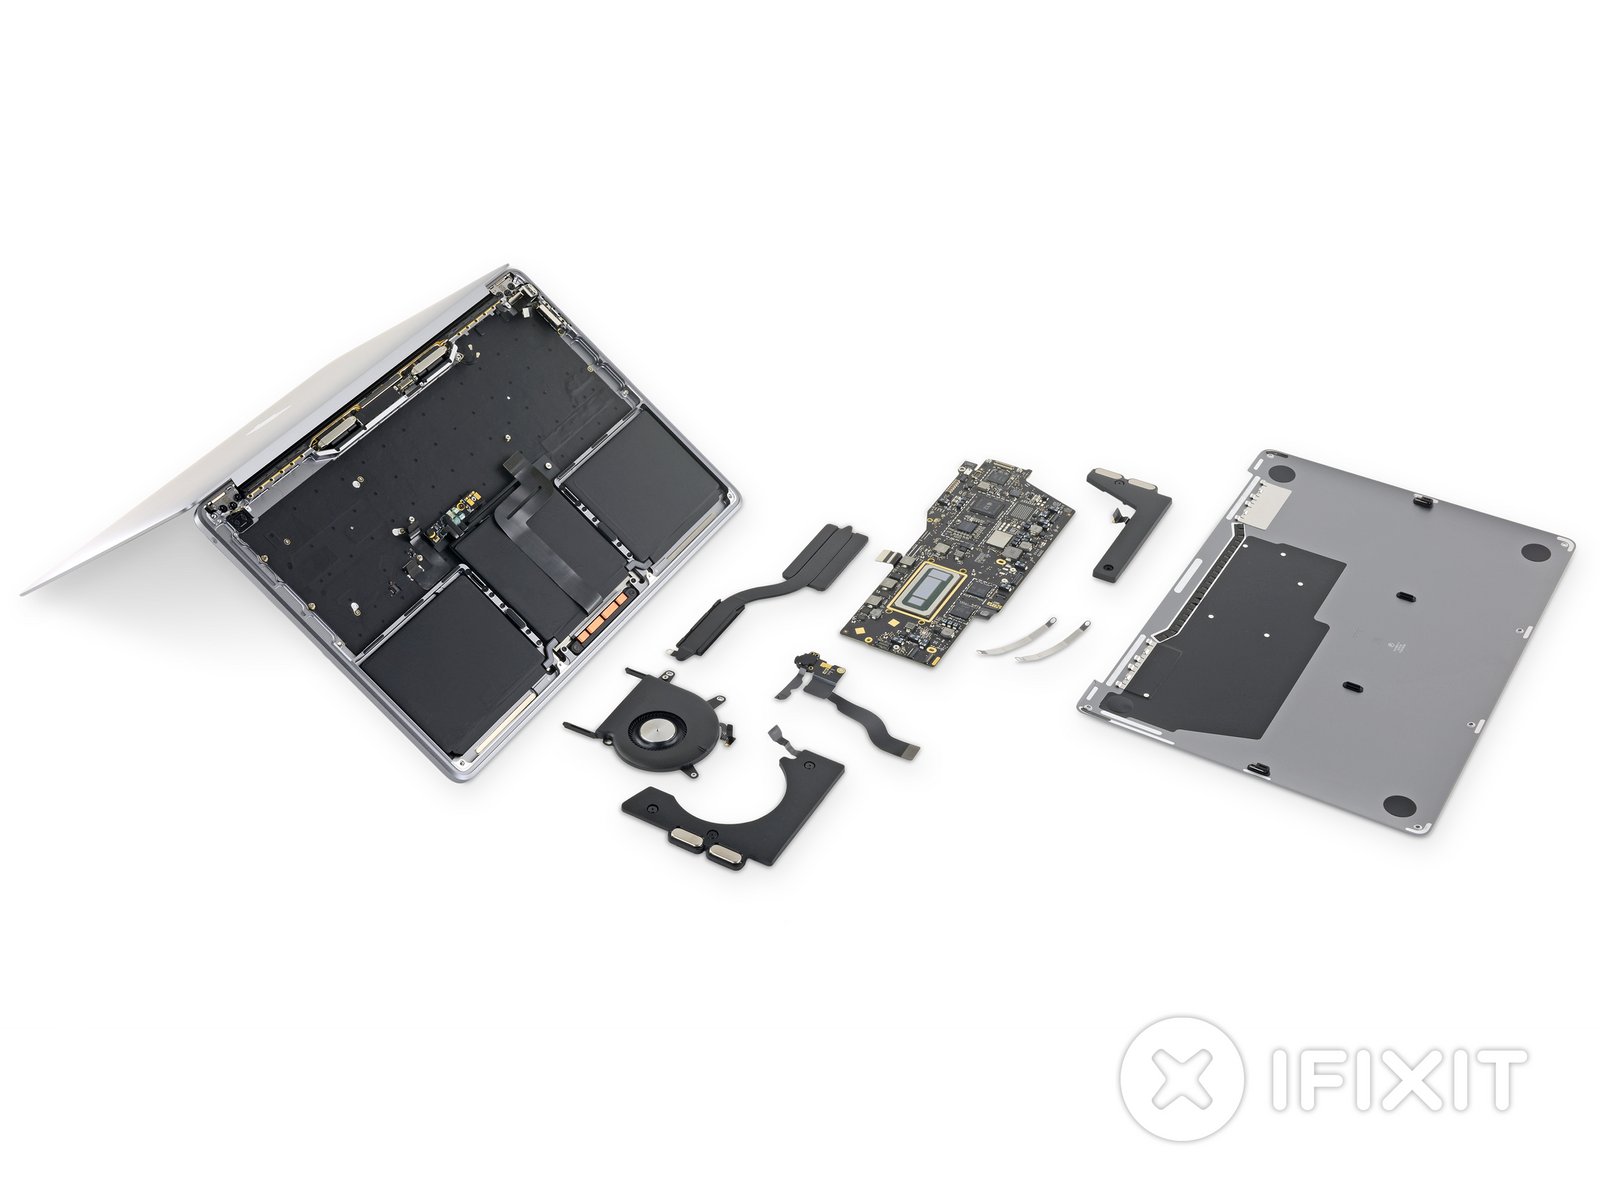 iFixit Teardown of 2019 Base 13-inch MacBook Pro Model Reveals Soldered-Down SSD, and Updated Keyboard, Reveals Larger Battery, Soldered-Down SSD, and Updated Keyboard Materials